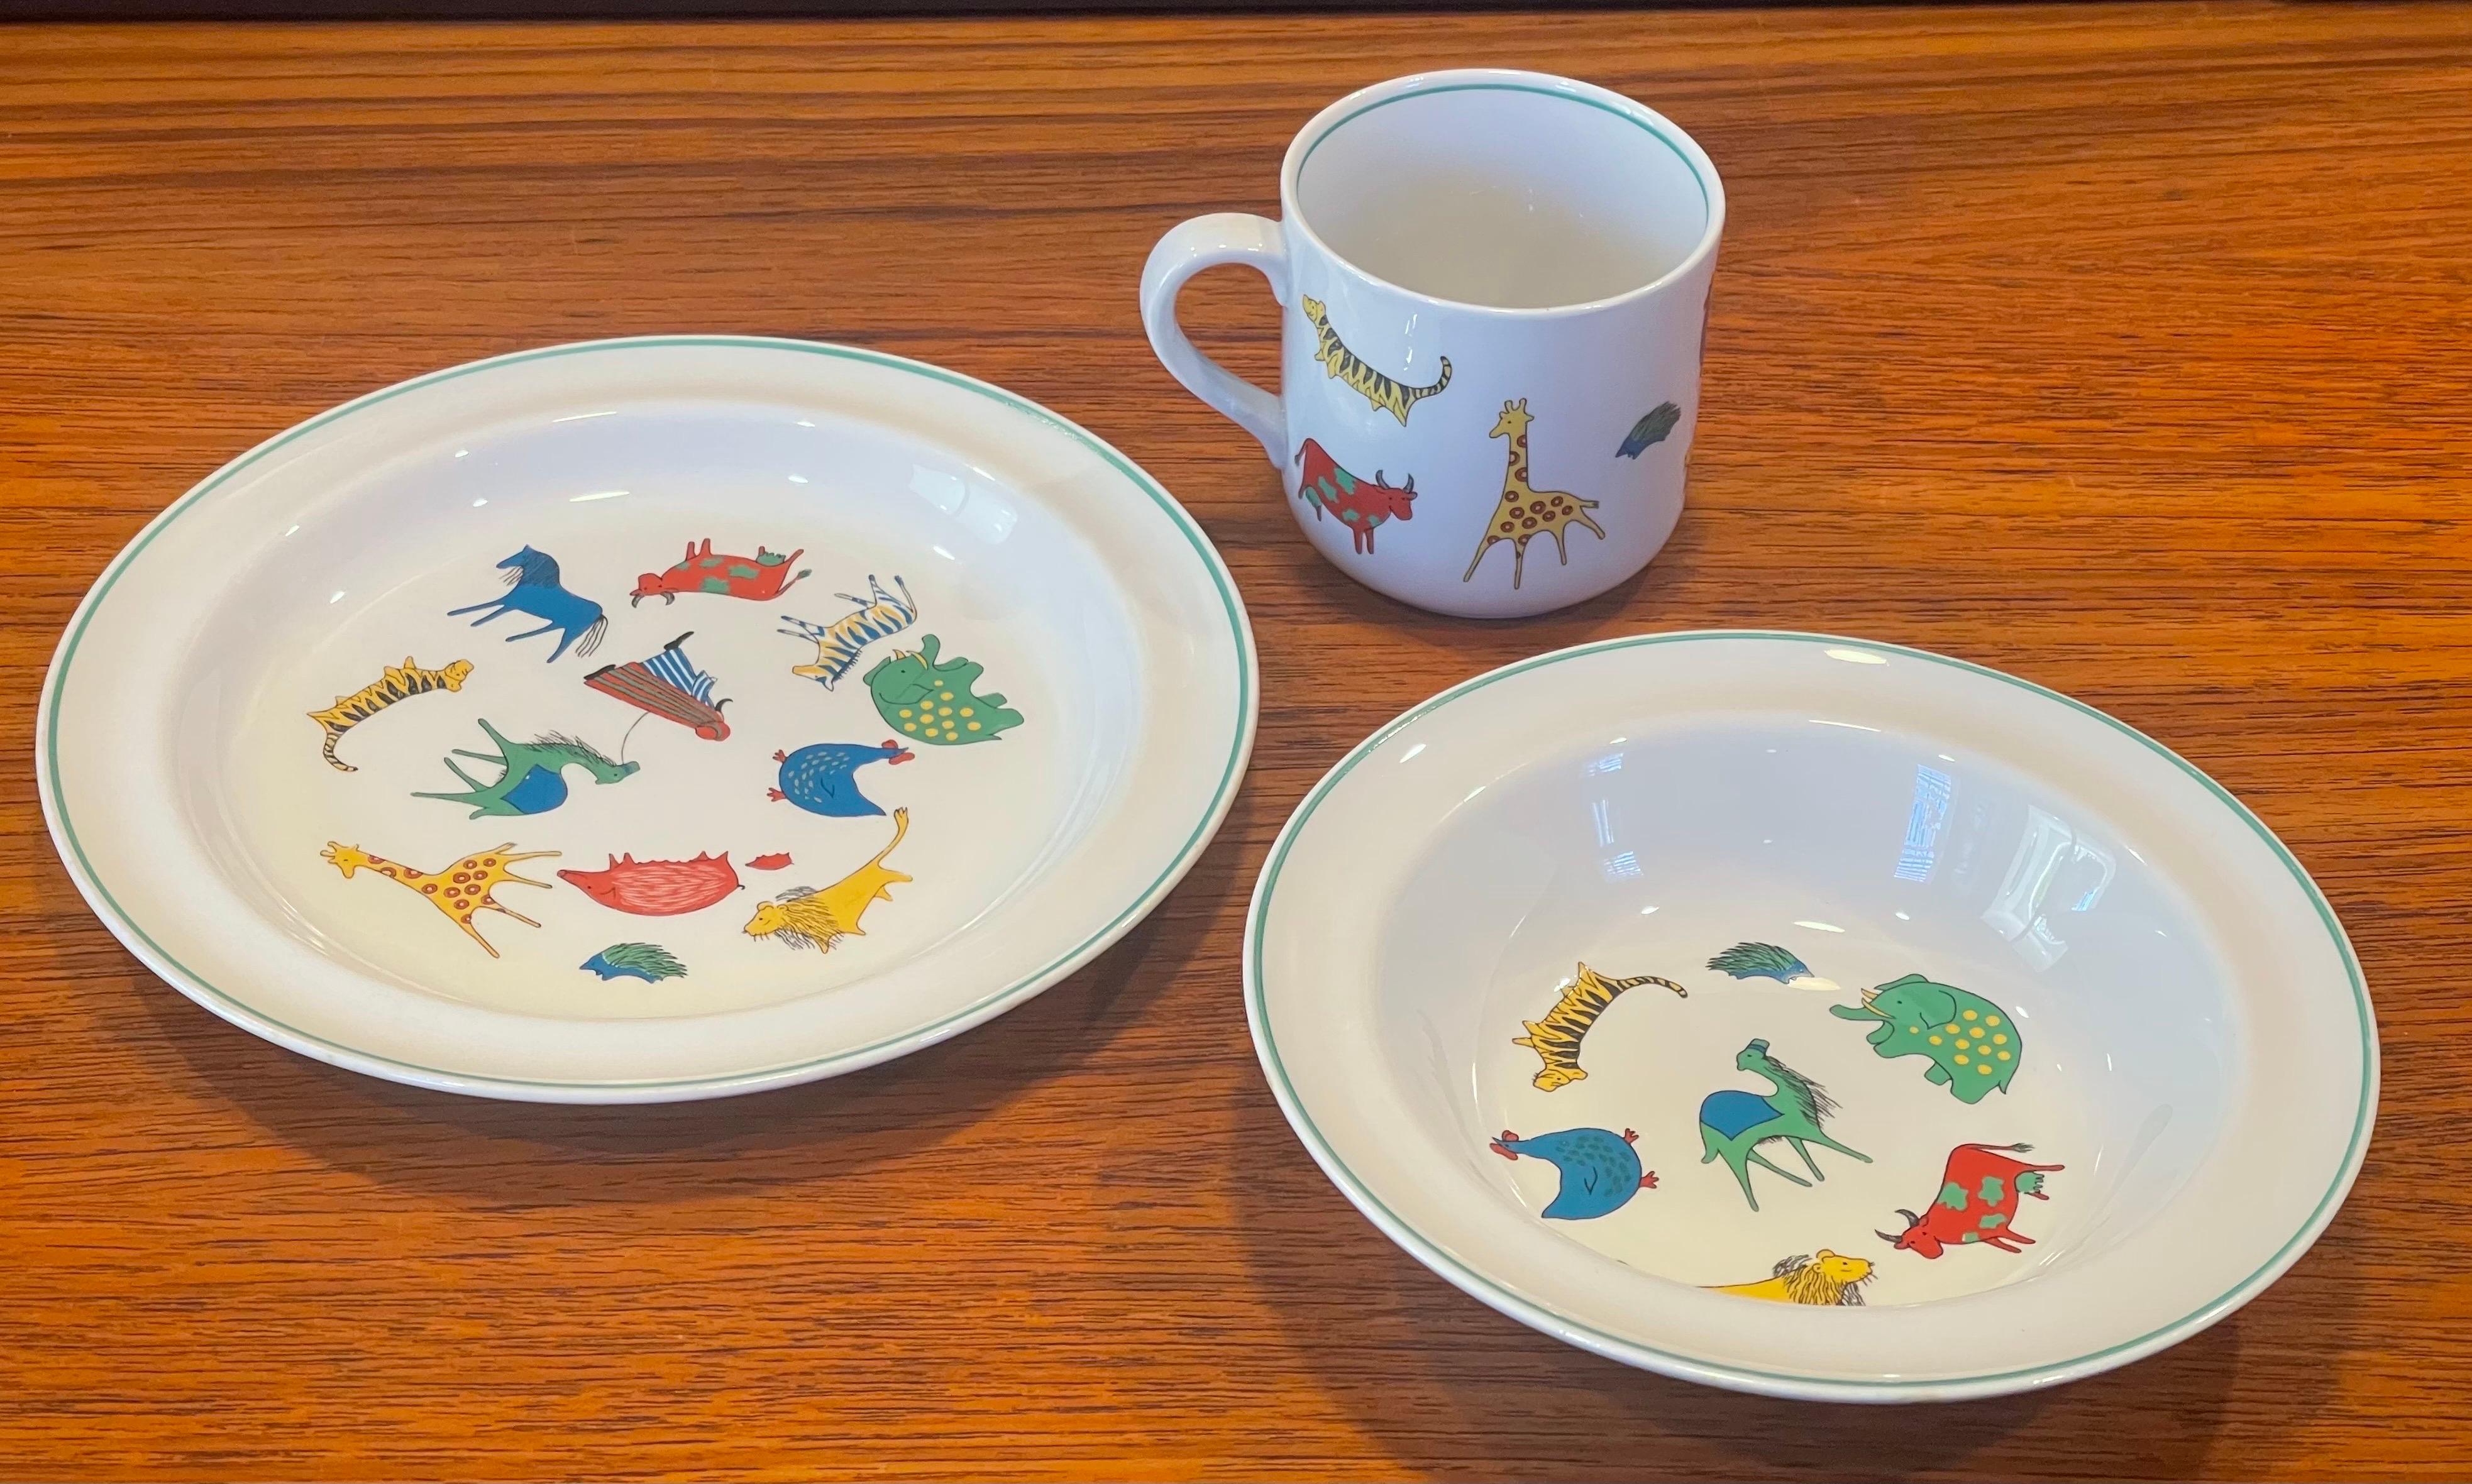 A cool Scandinavian modern three piece ceramic childs set by Arabia of Finland, circa 1970's. The set has a animal motiff with a number of colorful citters and is in very good condition no chips or cracks (there is some minor staining on the